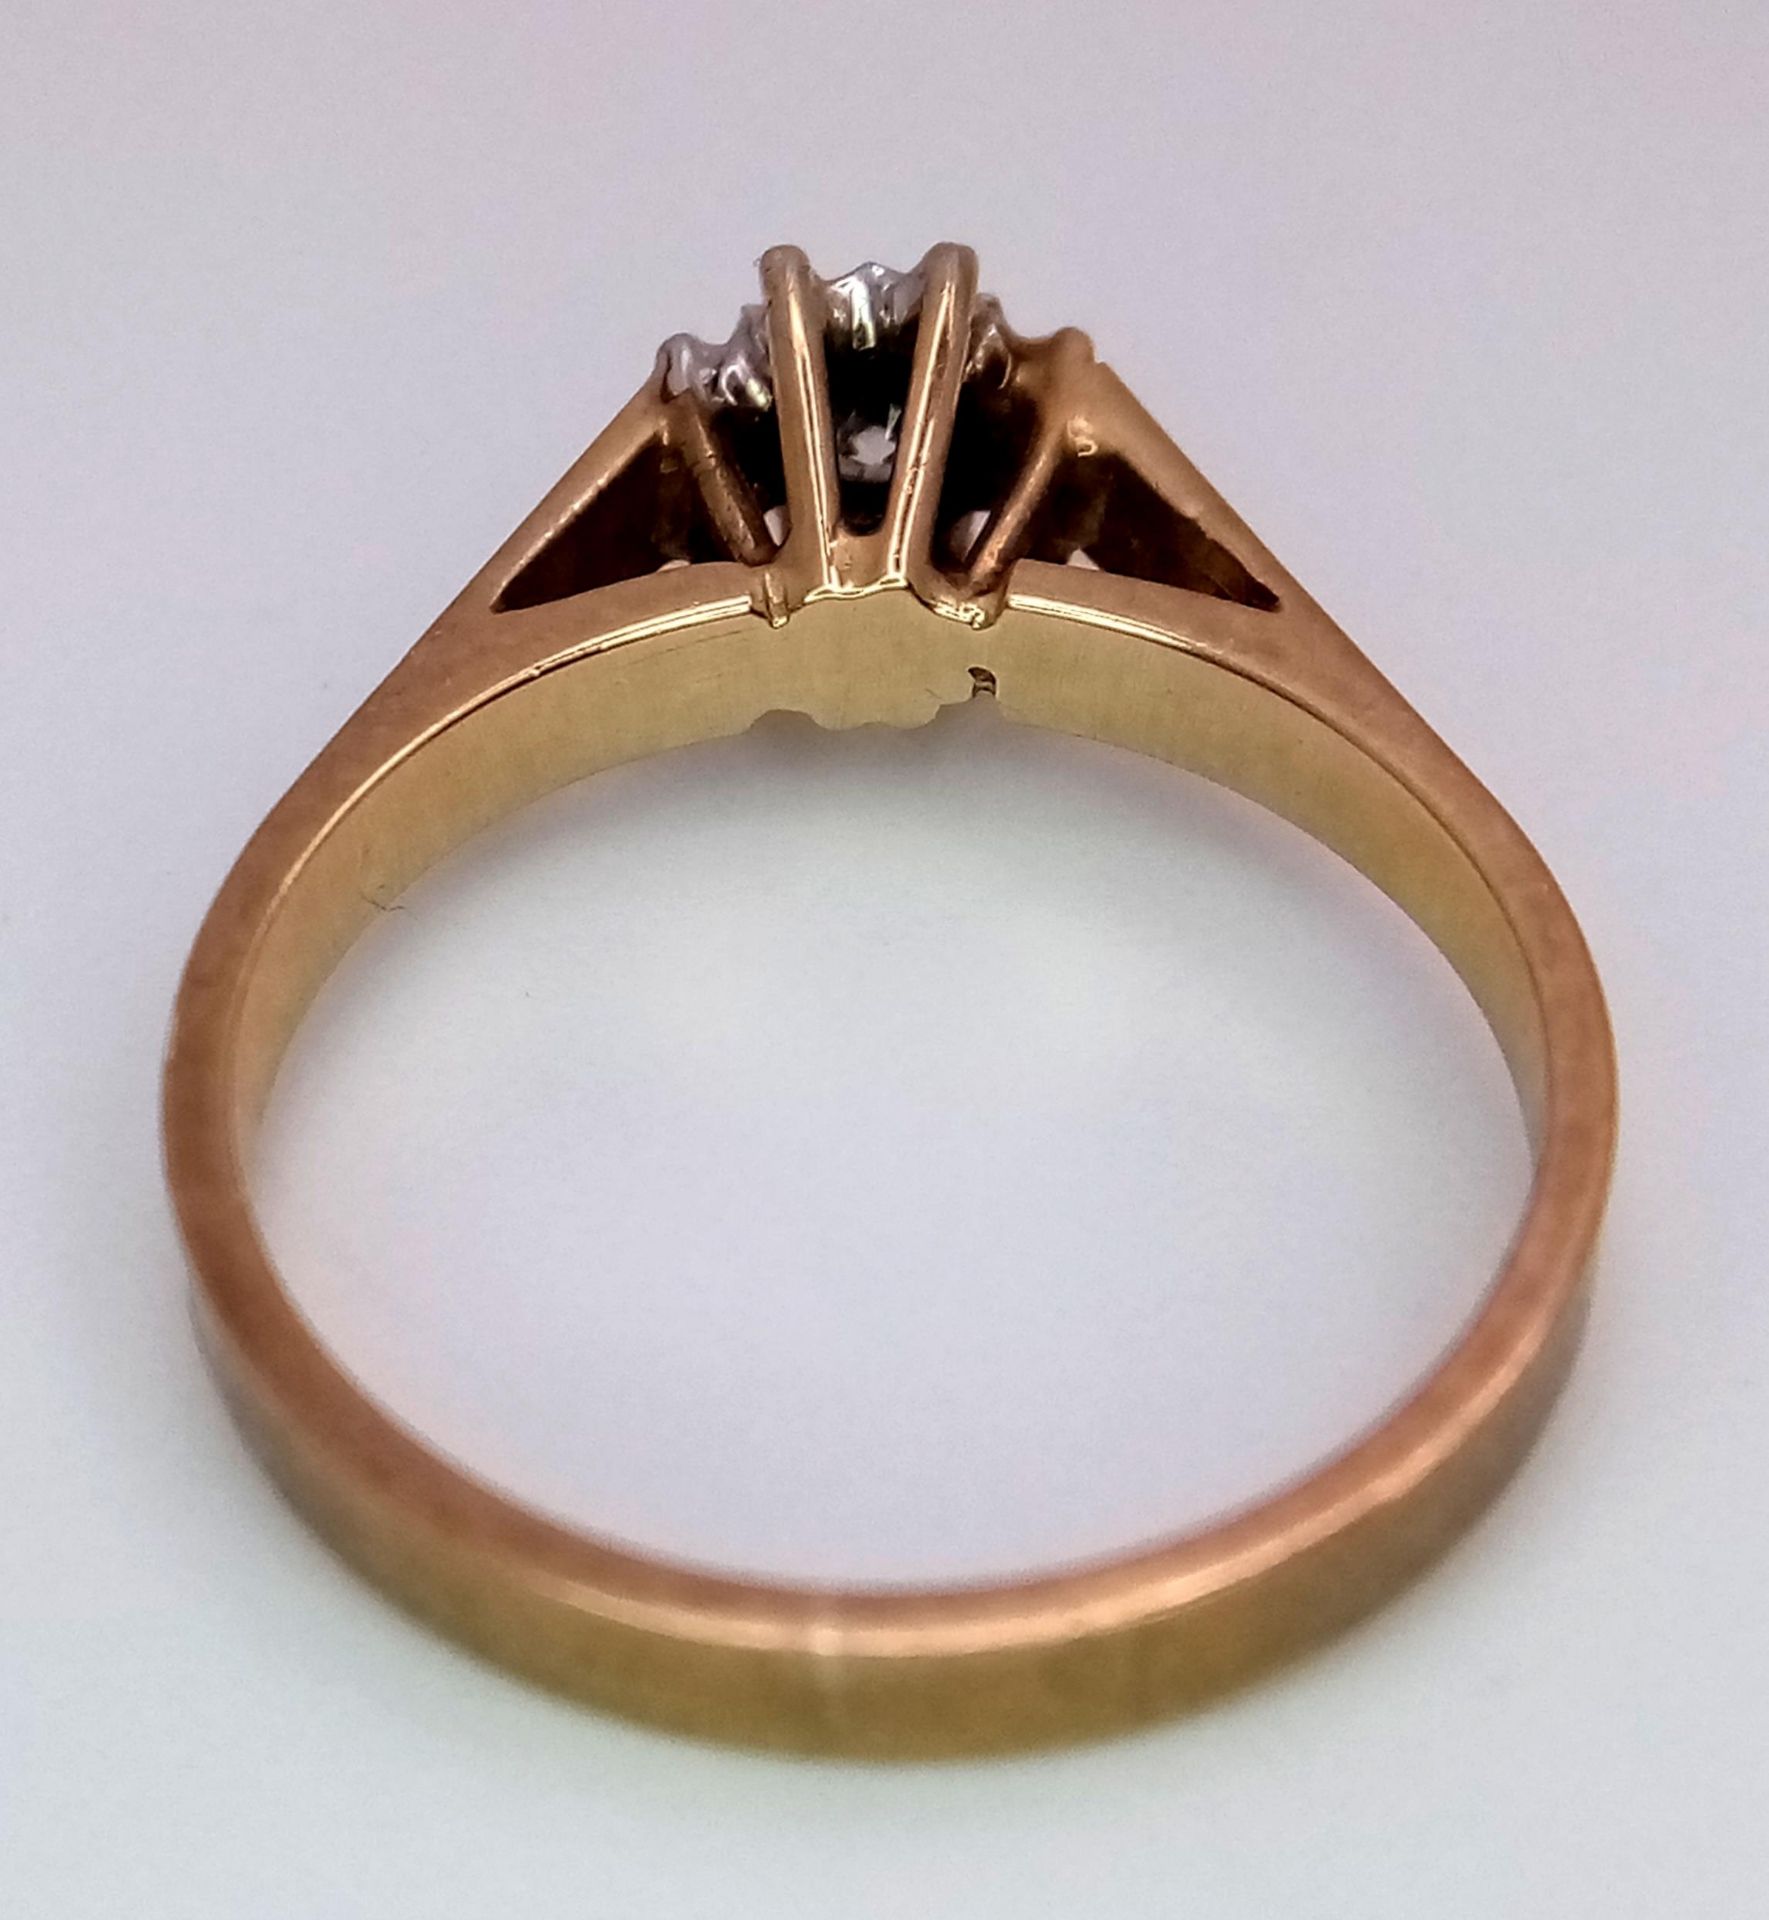 A 9K Yellow Gold Diamond Solitaire Ring. 0.15ct. Size K. 1.9g total weight. - Image 5 of 6